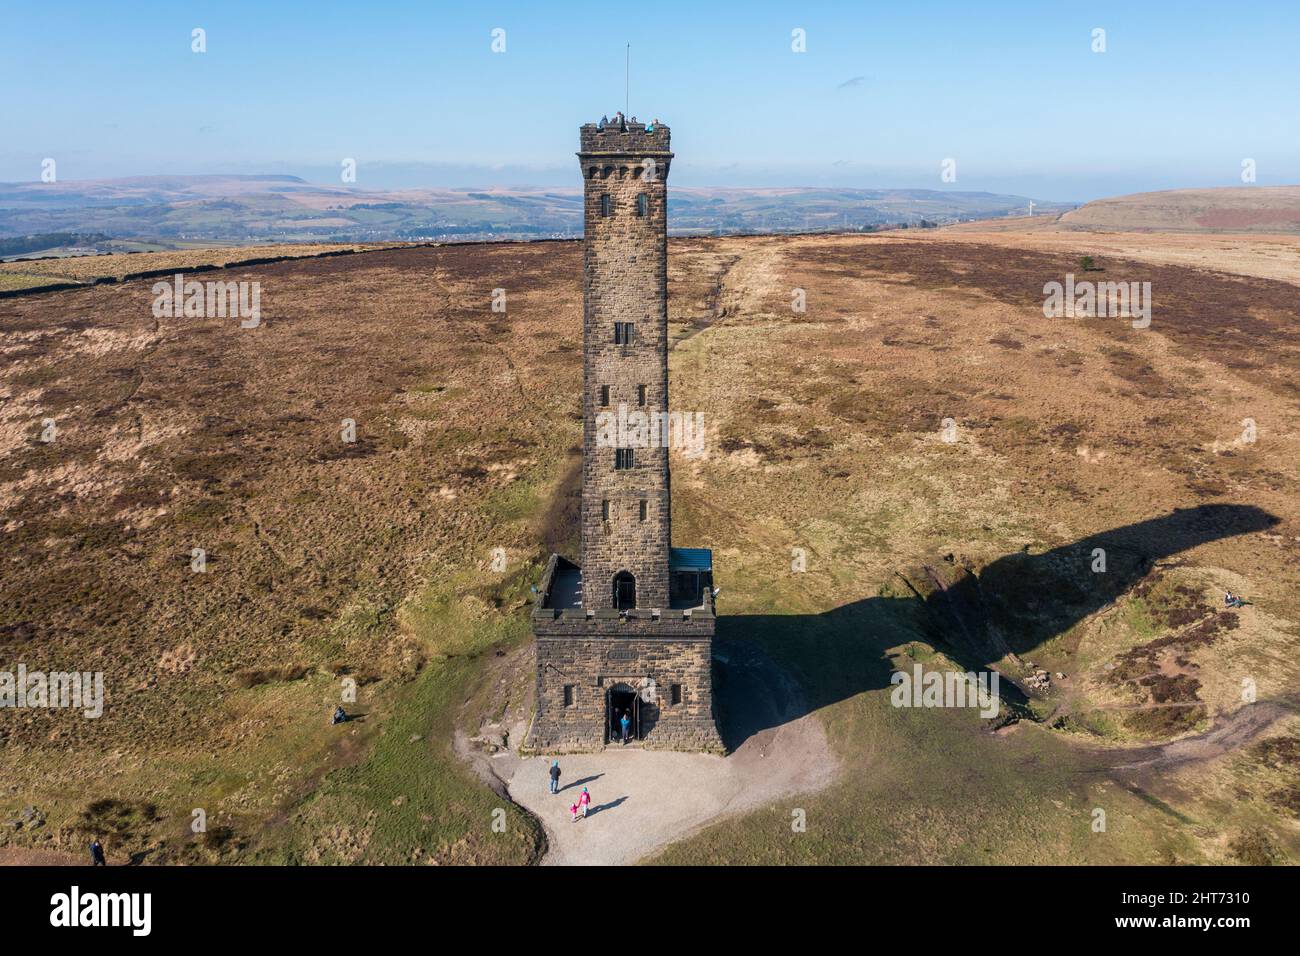 Peel Tower, Bury , Greater Manchester, UK Weather. A lovely day across Greater Manchester greets Peel Tower Built in 1852, this well known Bury landmark was erected in tribute to one of Bury's most famous sons, Sir Robert Peel; founder of the Police force and Prime Minister 1841-1846 . Credit : Tom McAtee/Alamy Live News Stock Photo